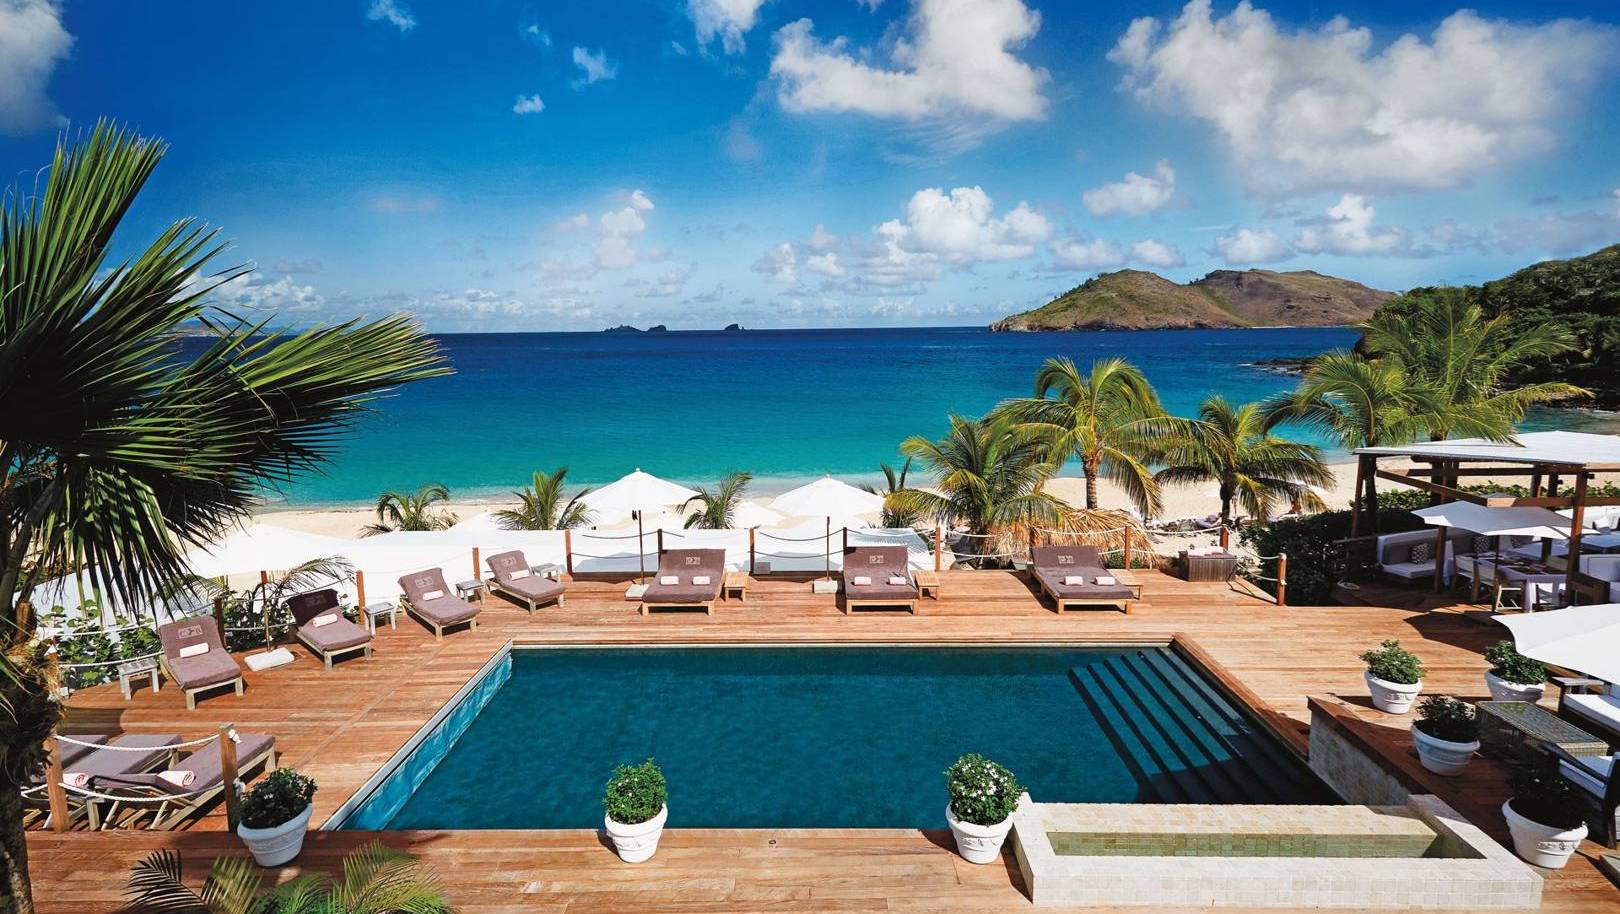 Top 10 Best Hotels And Resorts in St Barth